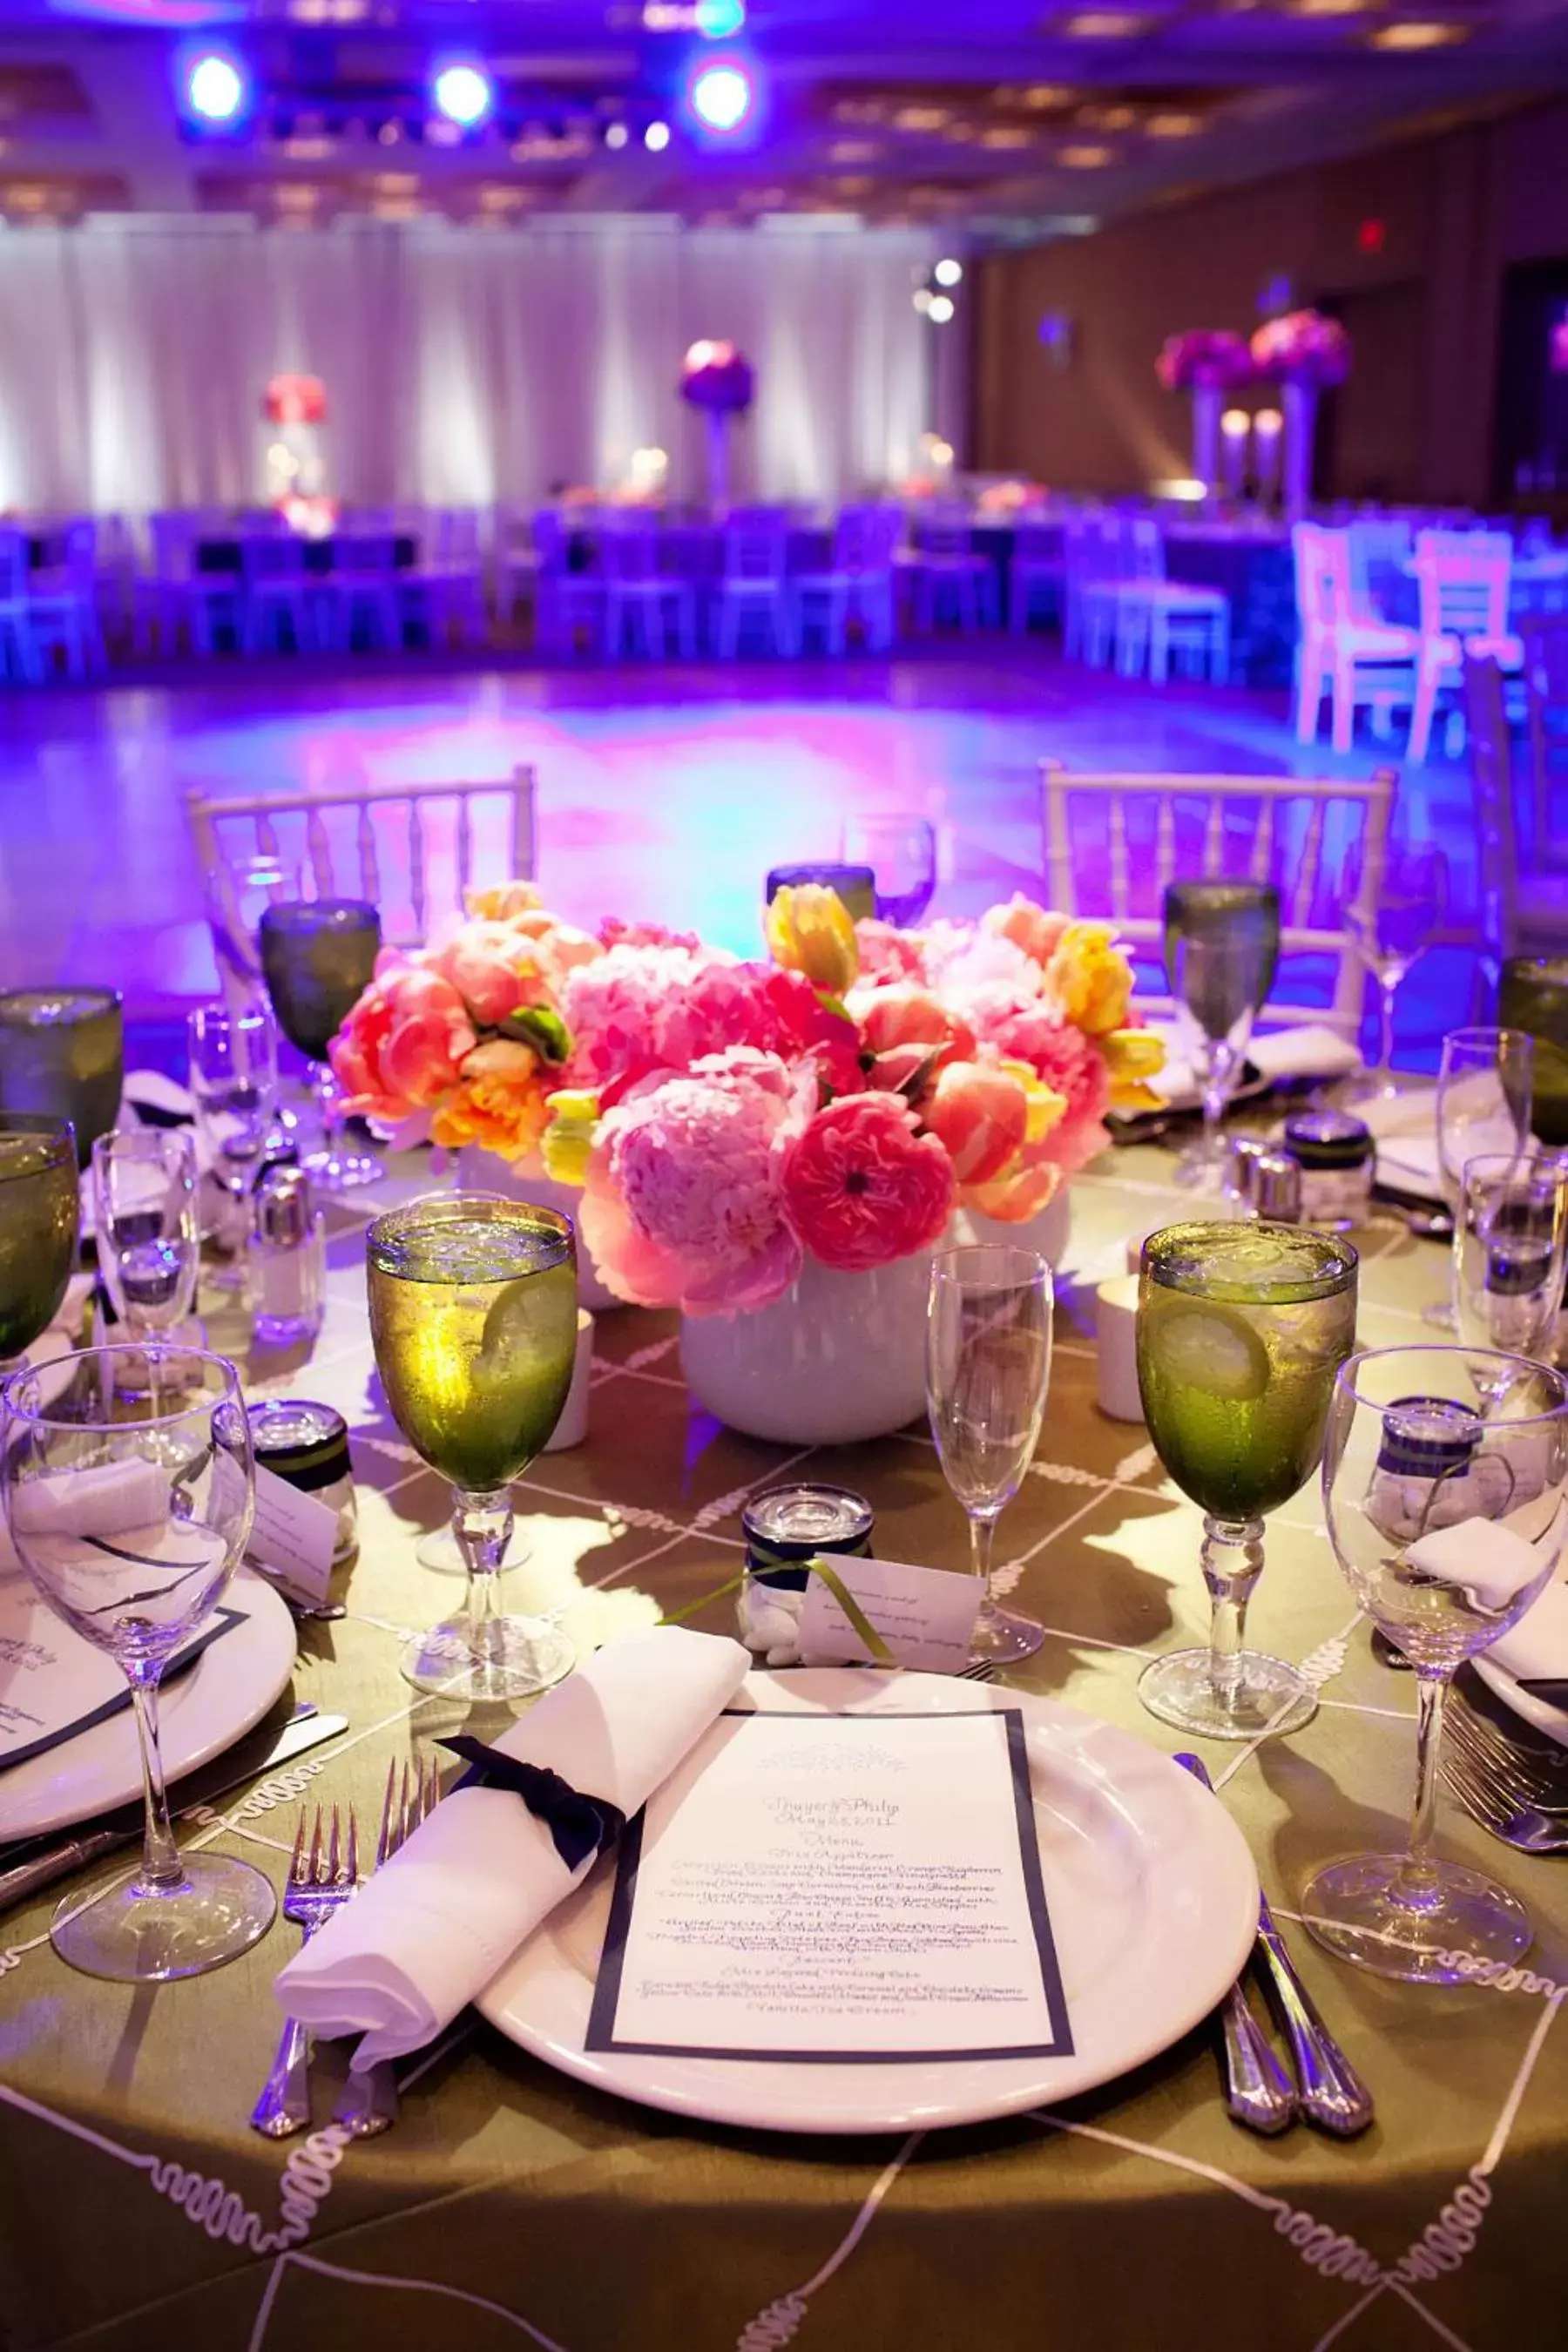 Banquet/Function facilities, Banquet Facilities in The Charles Hotel in Harvard Square